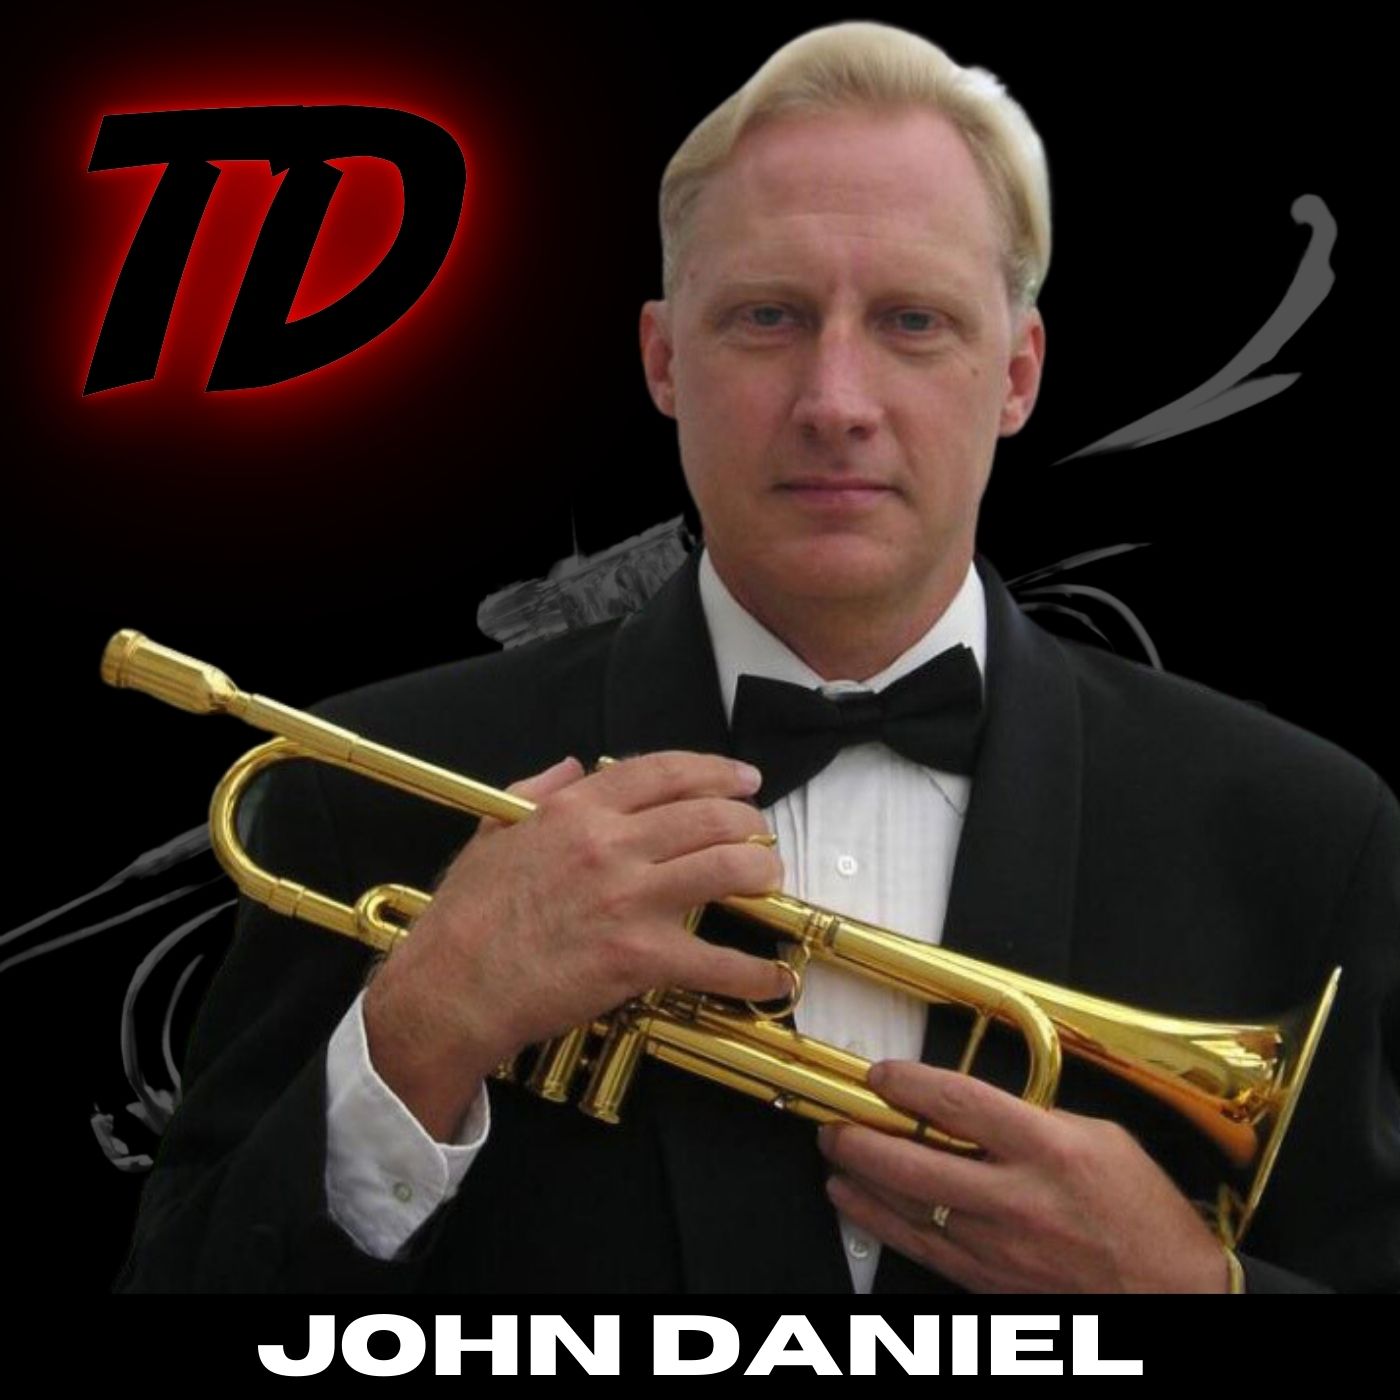 Gestalt Theory for Trumpeters, the Profound Qualities of the Cornet vs. Trumpet, Memories From the Premier Brass Band in America and More with John Daniel